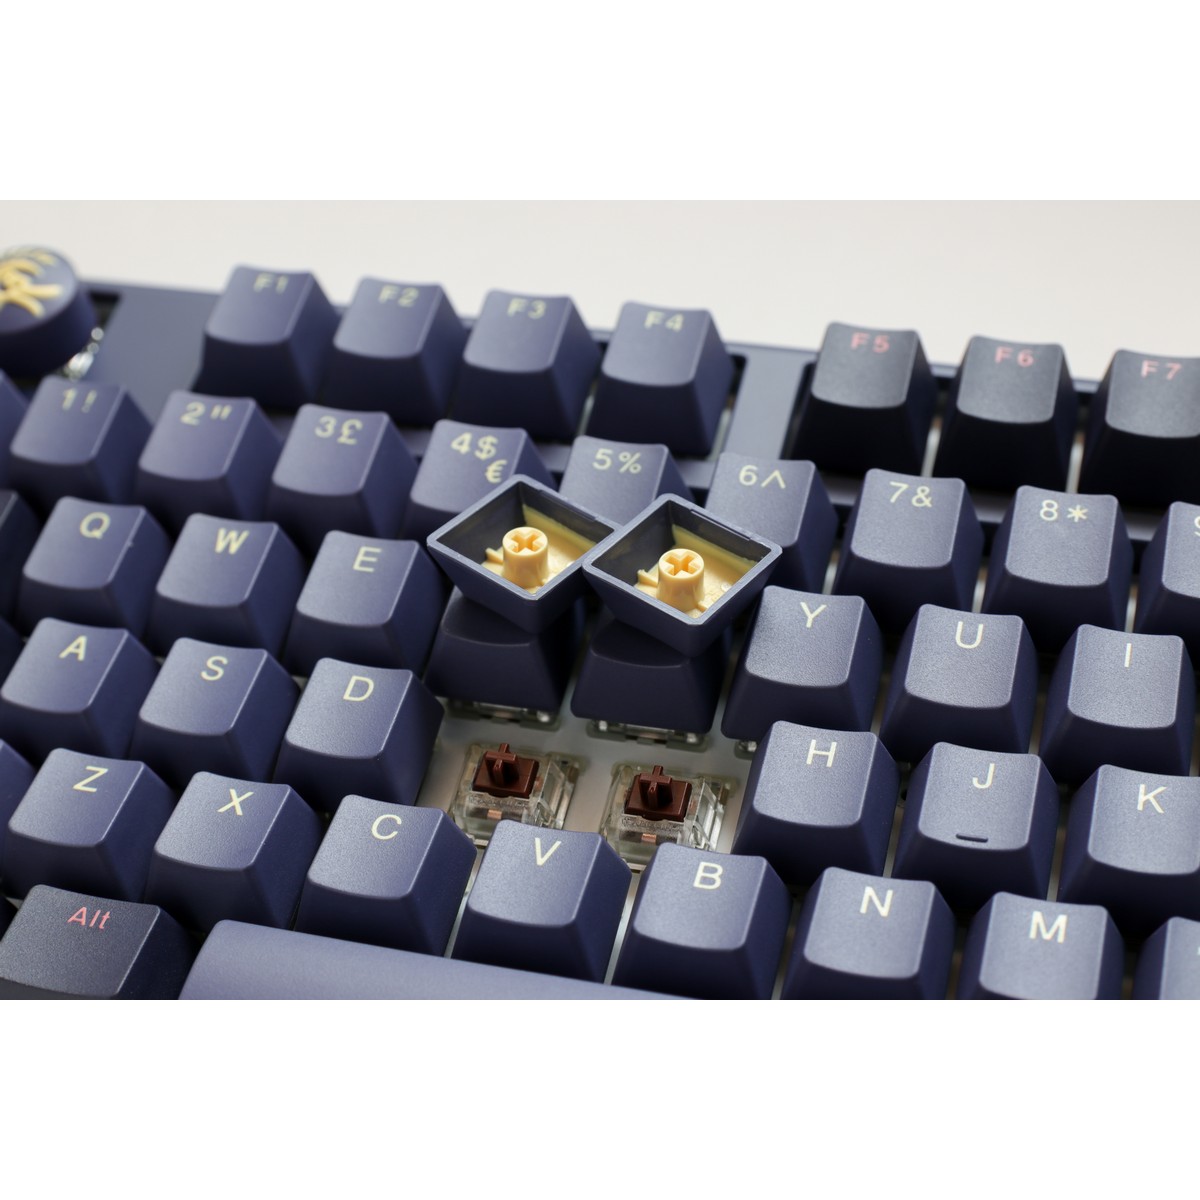 Ducky - Ducky One 3 Cosmic USB RGB Mechanical Gaming Keyboard Cherry MX Speed Silver Switch - UK Layout